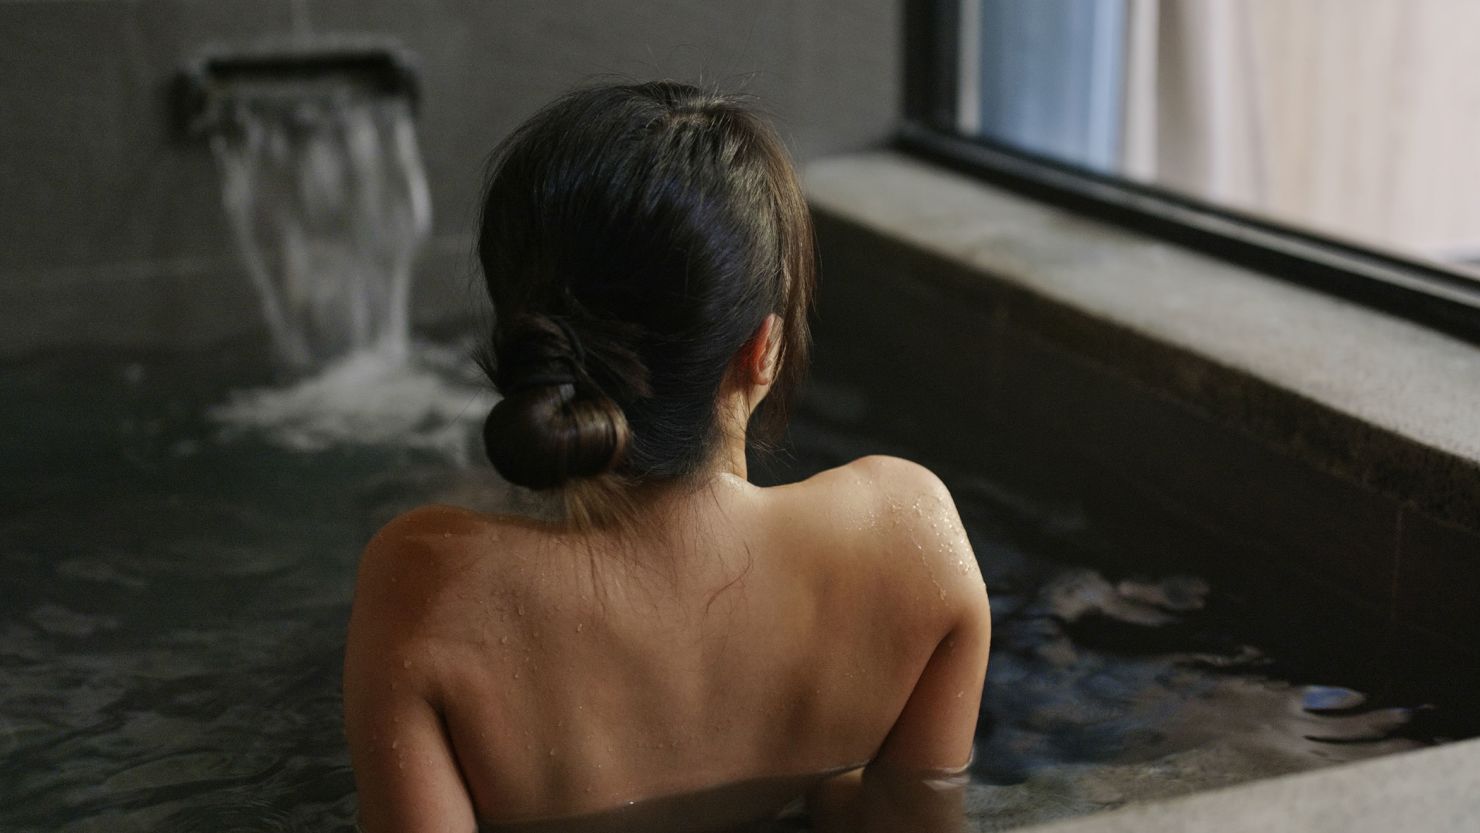 Taking a bath isn't just relaxing. It could also be good for your heart,  study says